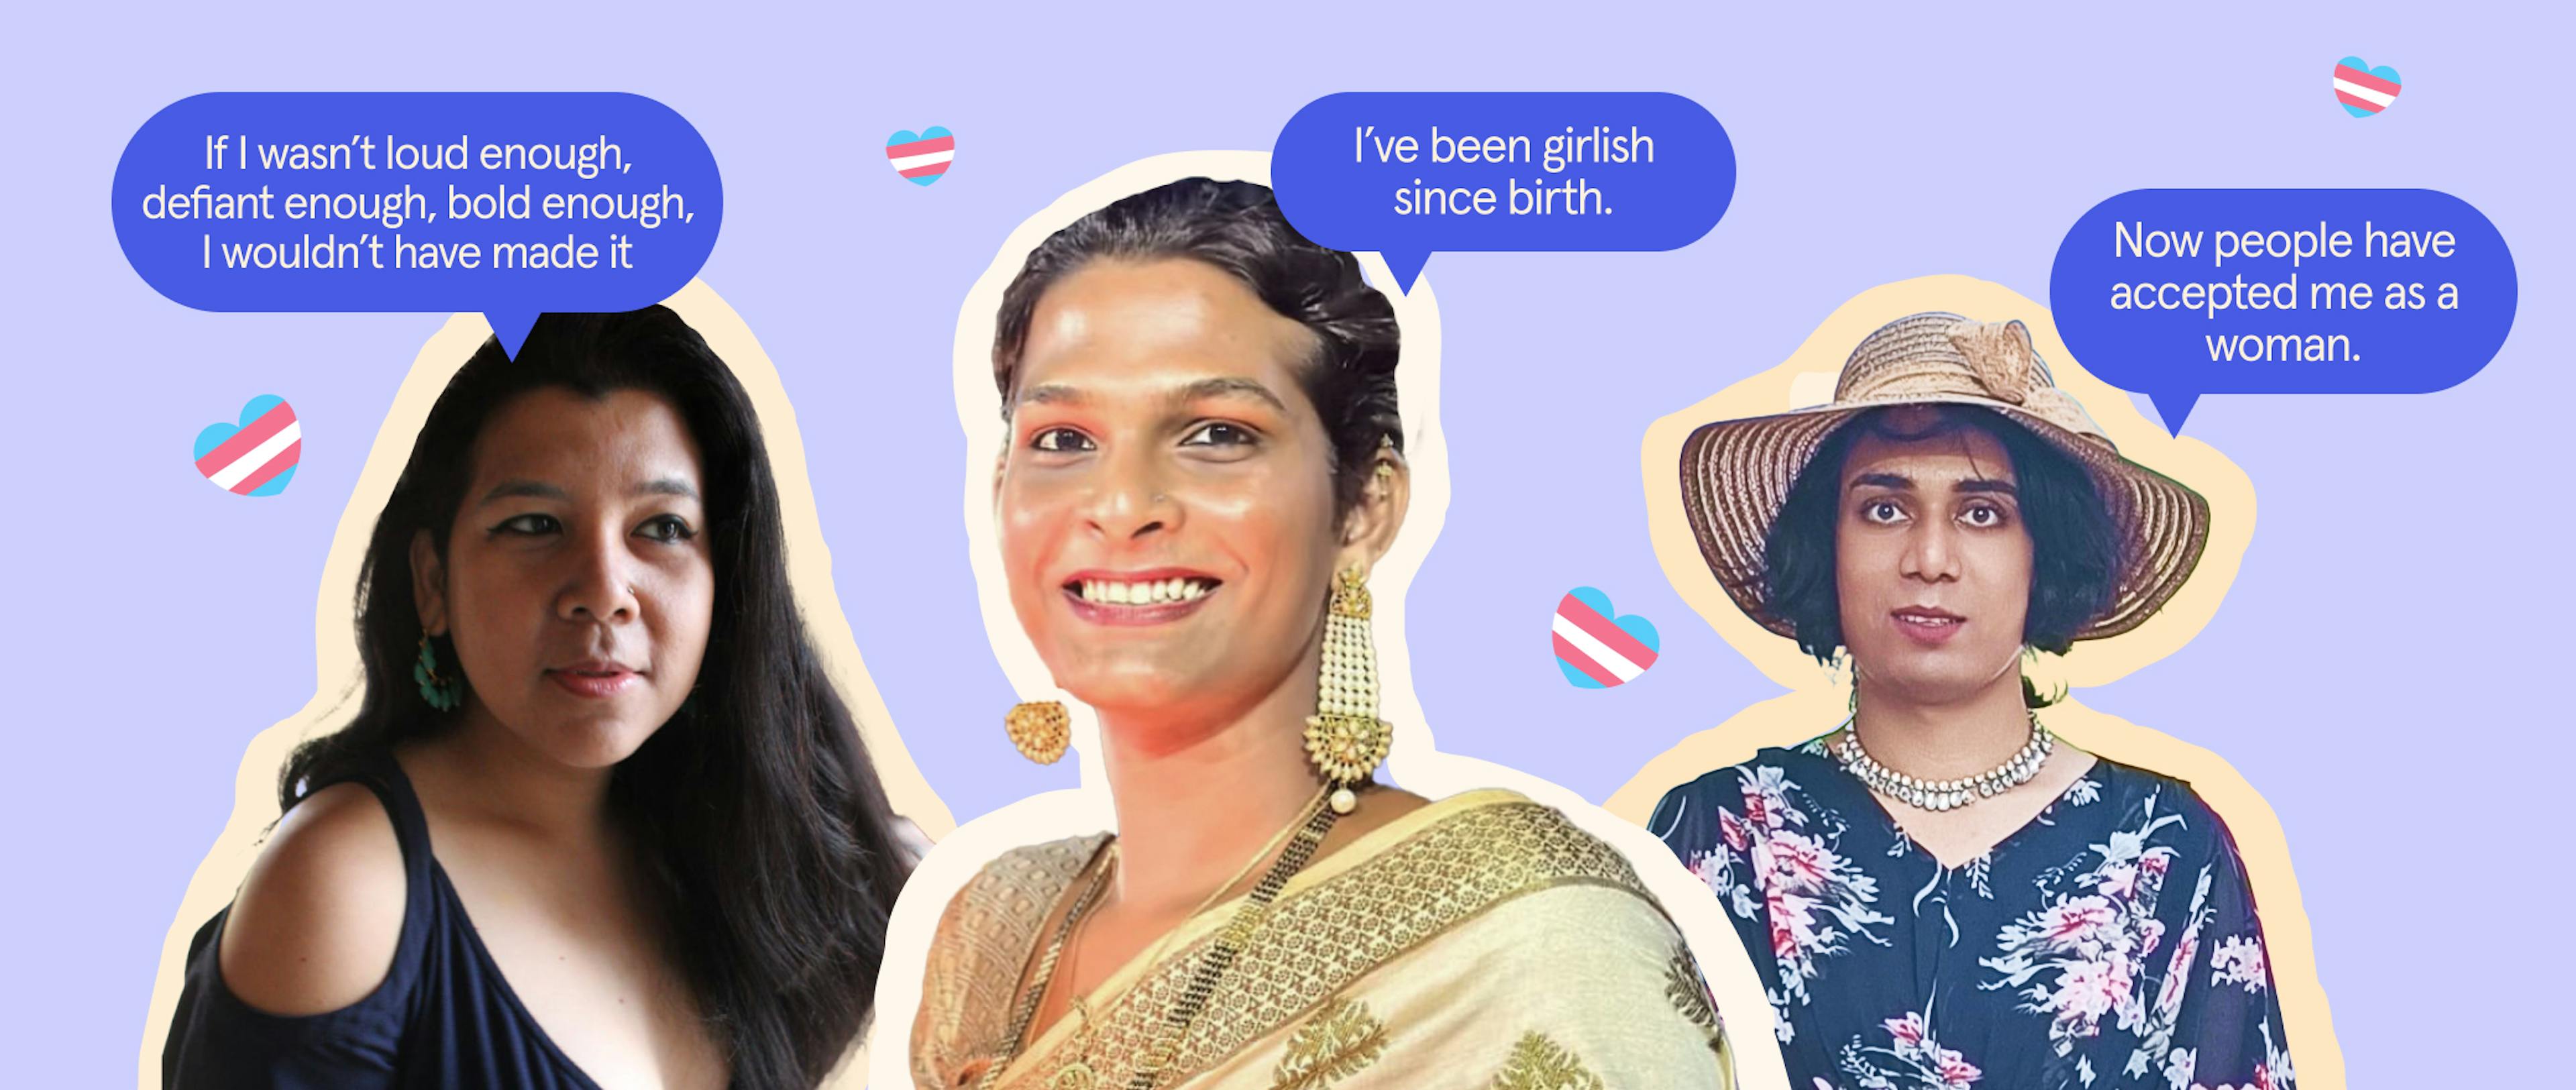 An image with photographs of Glamika, Avantika and Nikita; three transwomen who shared their transition experience and quotes from them.